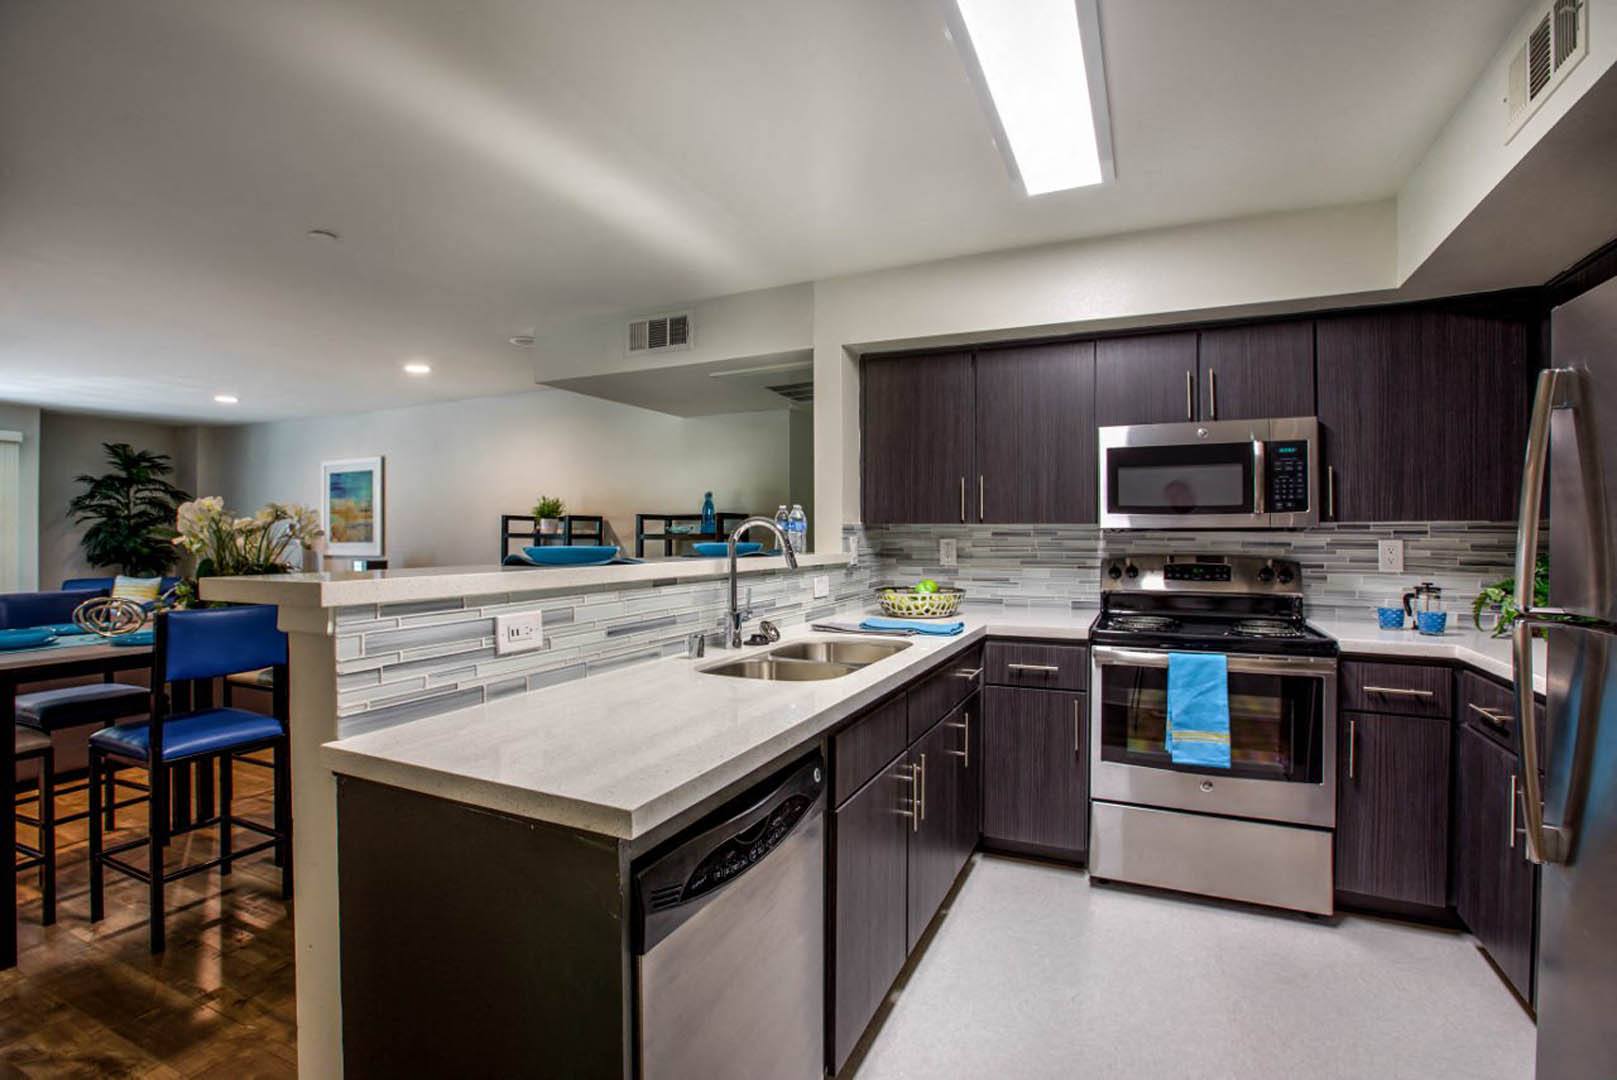 Kitchen 433 Midvale - Student Housing at UCLA Los Angeles (310)824-1737